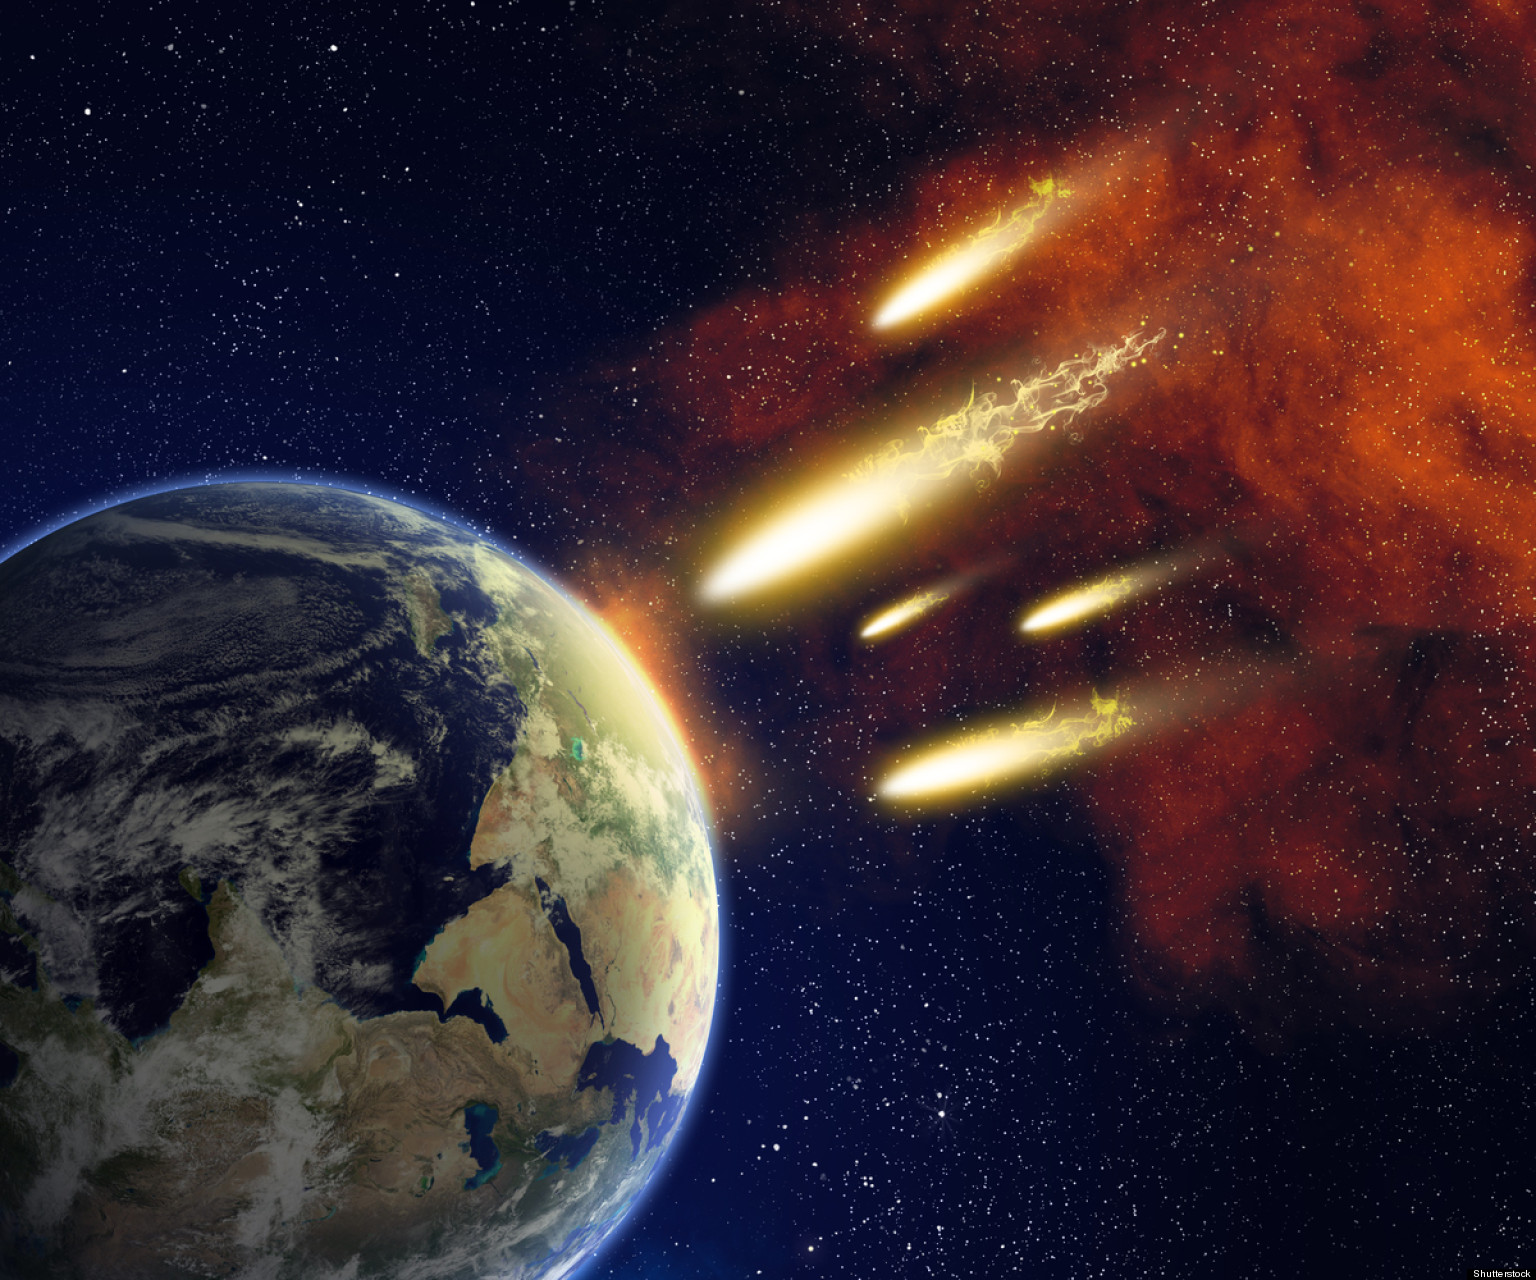 Russian Meteor, Asteroid DA14 Flyby Not Linked, NASA Says | HuffPost